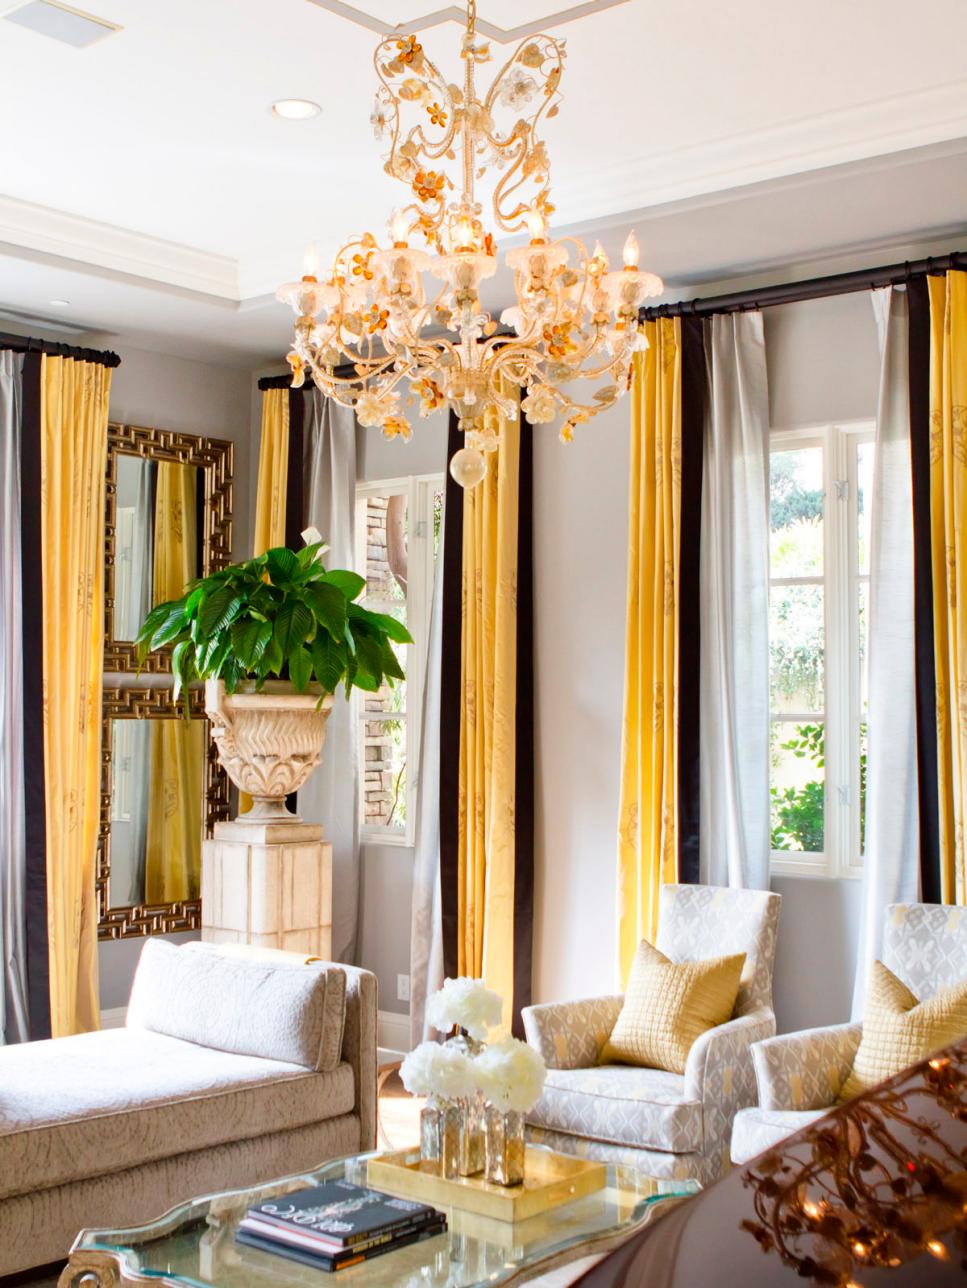 Glamorous Gold and Gray Living Room With Floral Chandelier